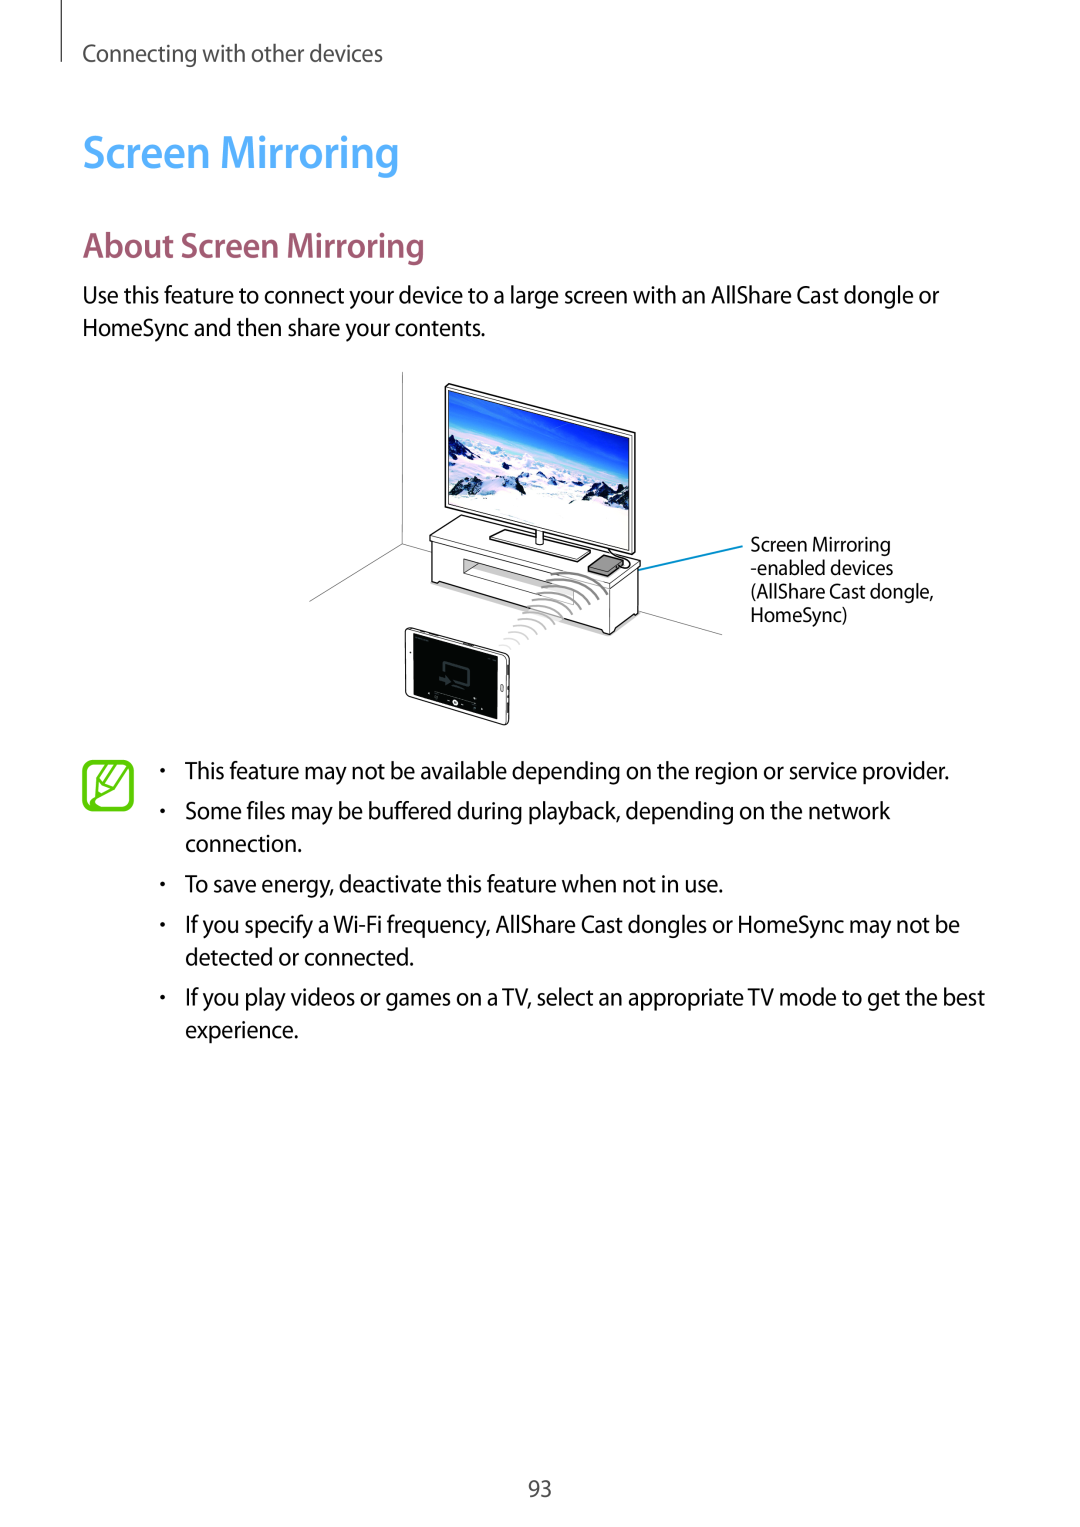 Samsung SM-P550NZWADBT, SM-P550NZKALUX, SM-P550NZWACHN manual About Screen Mirroring, Connecting with other devices 